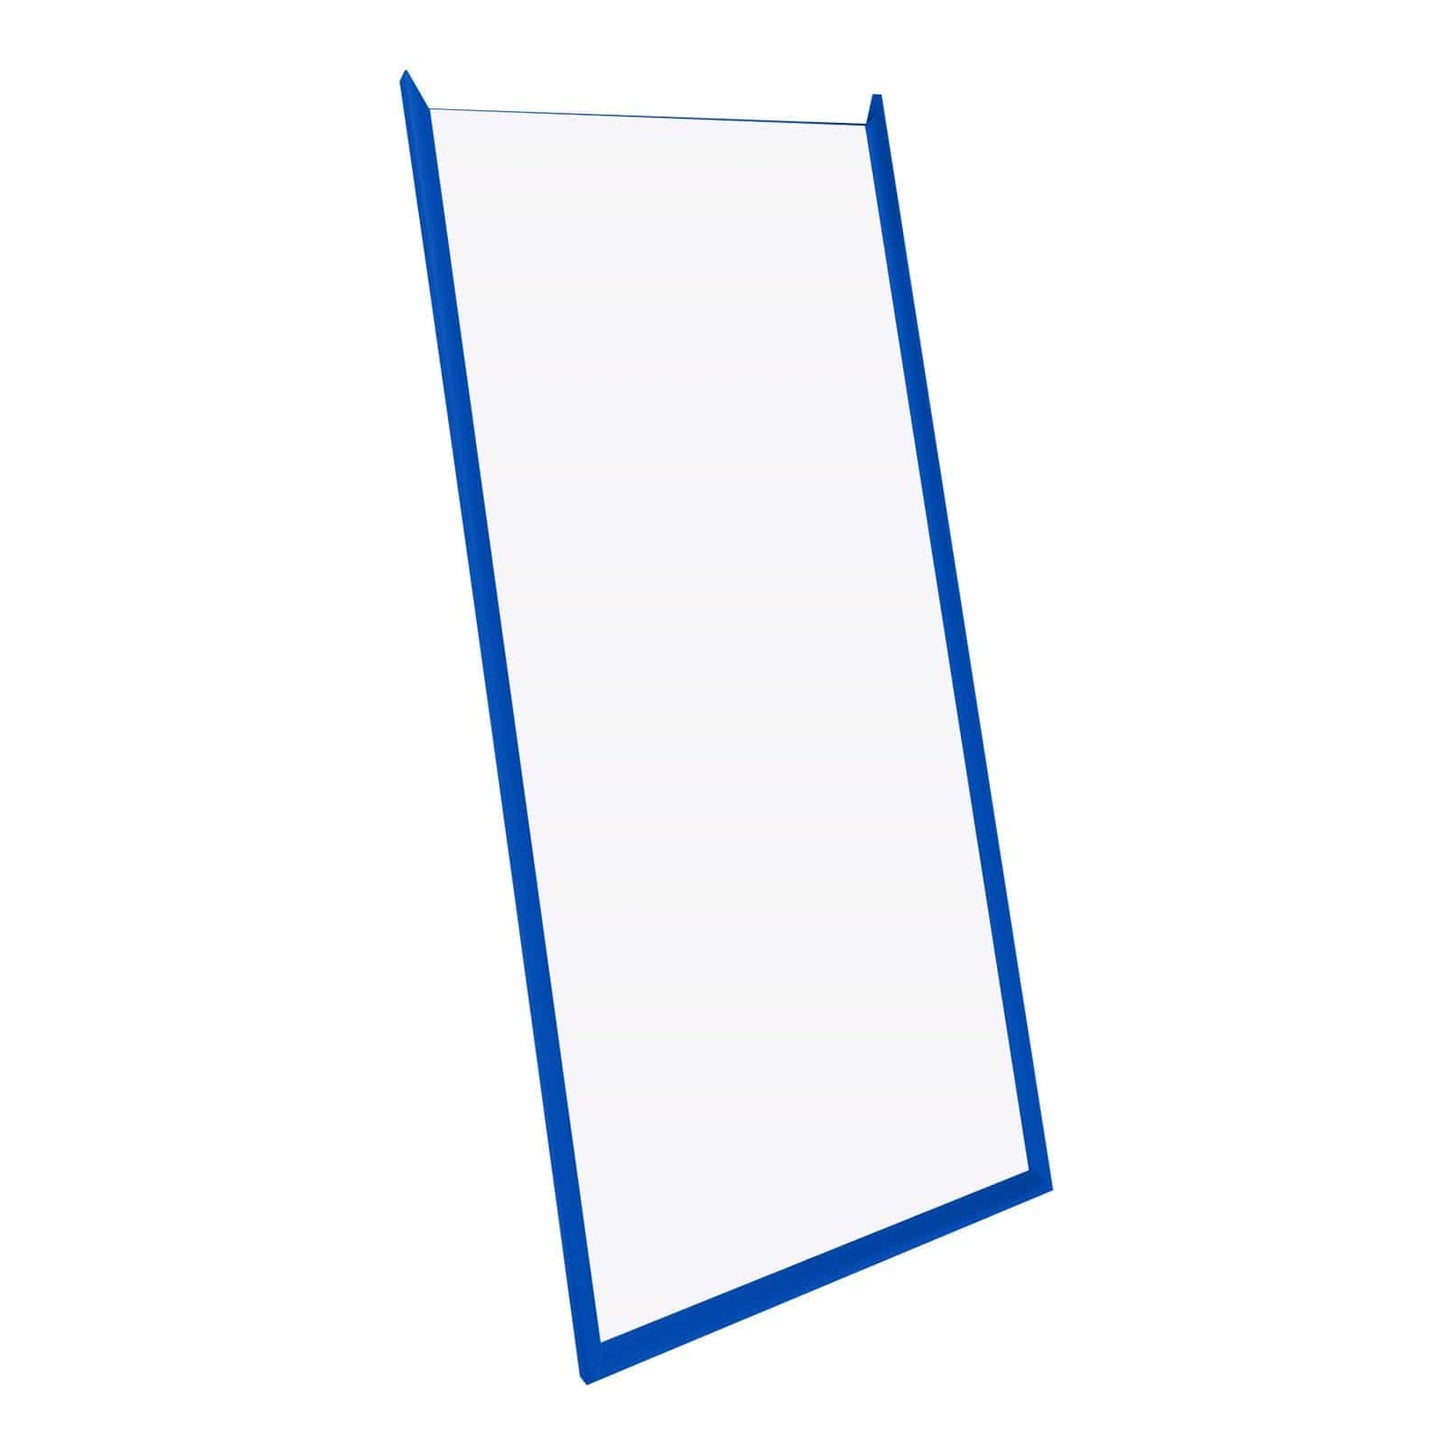 17x38 Blue SnapeZo® Snap Frame - 1.2" Profile - Snap Frames Direct